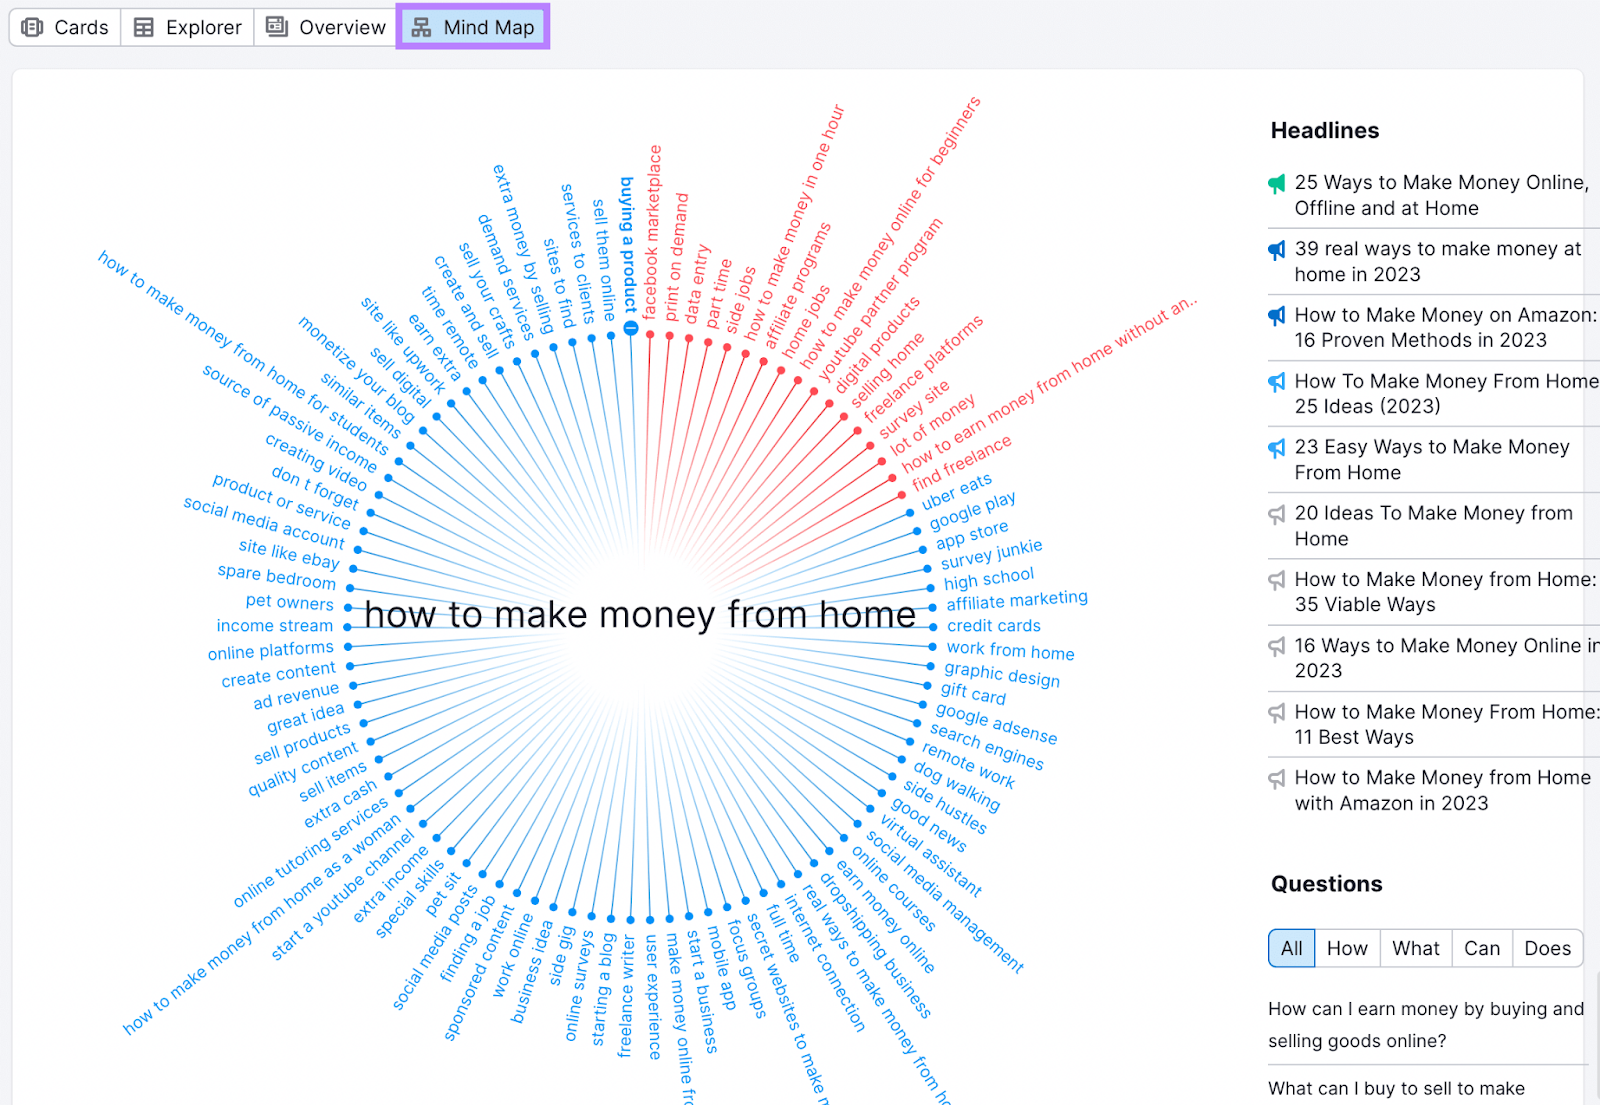 "Mind Map" for "how to make money from home" under "Content Ideas" in Topic Research tool